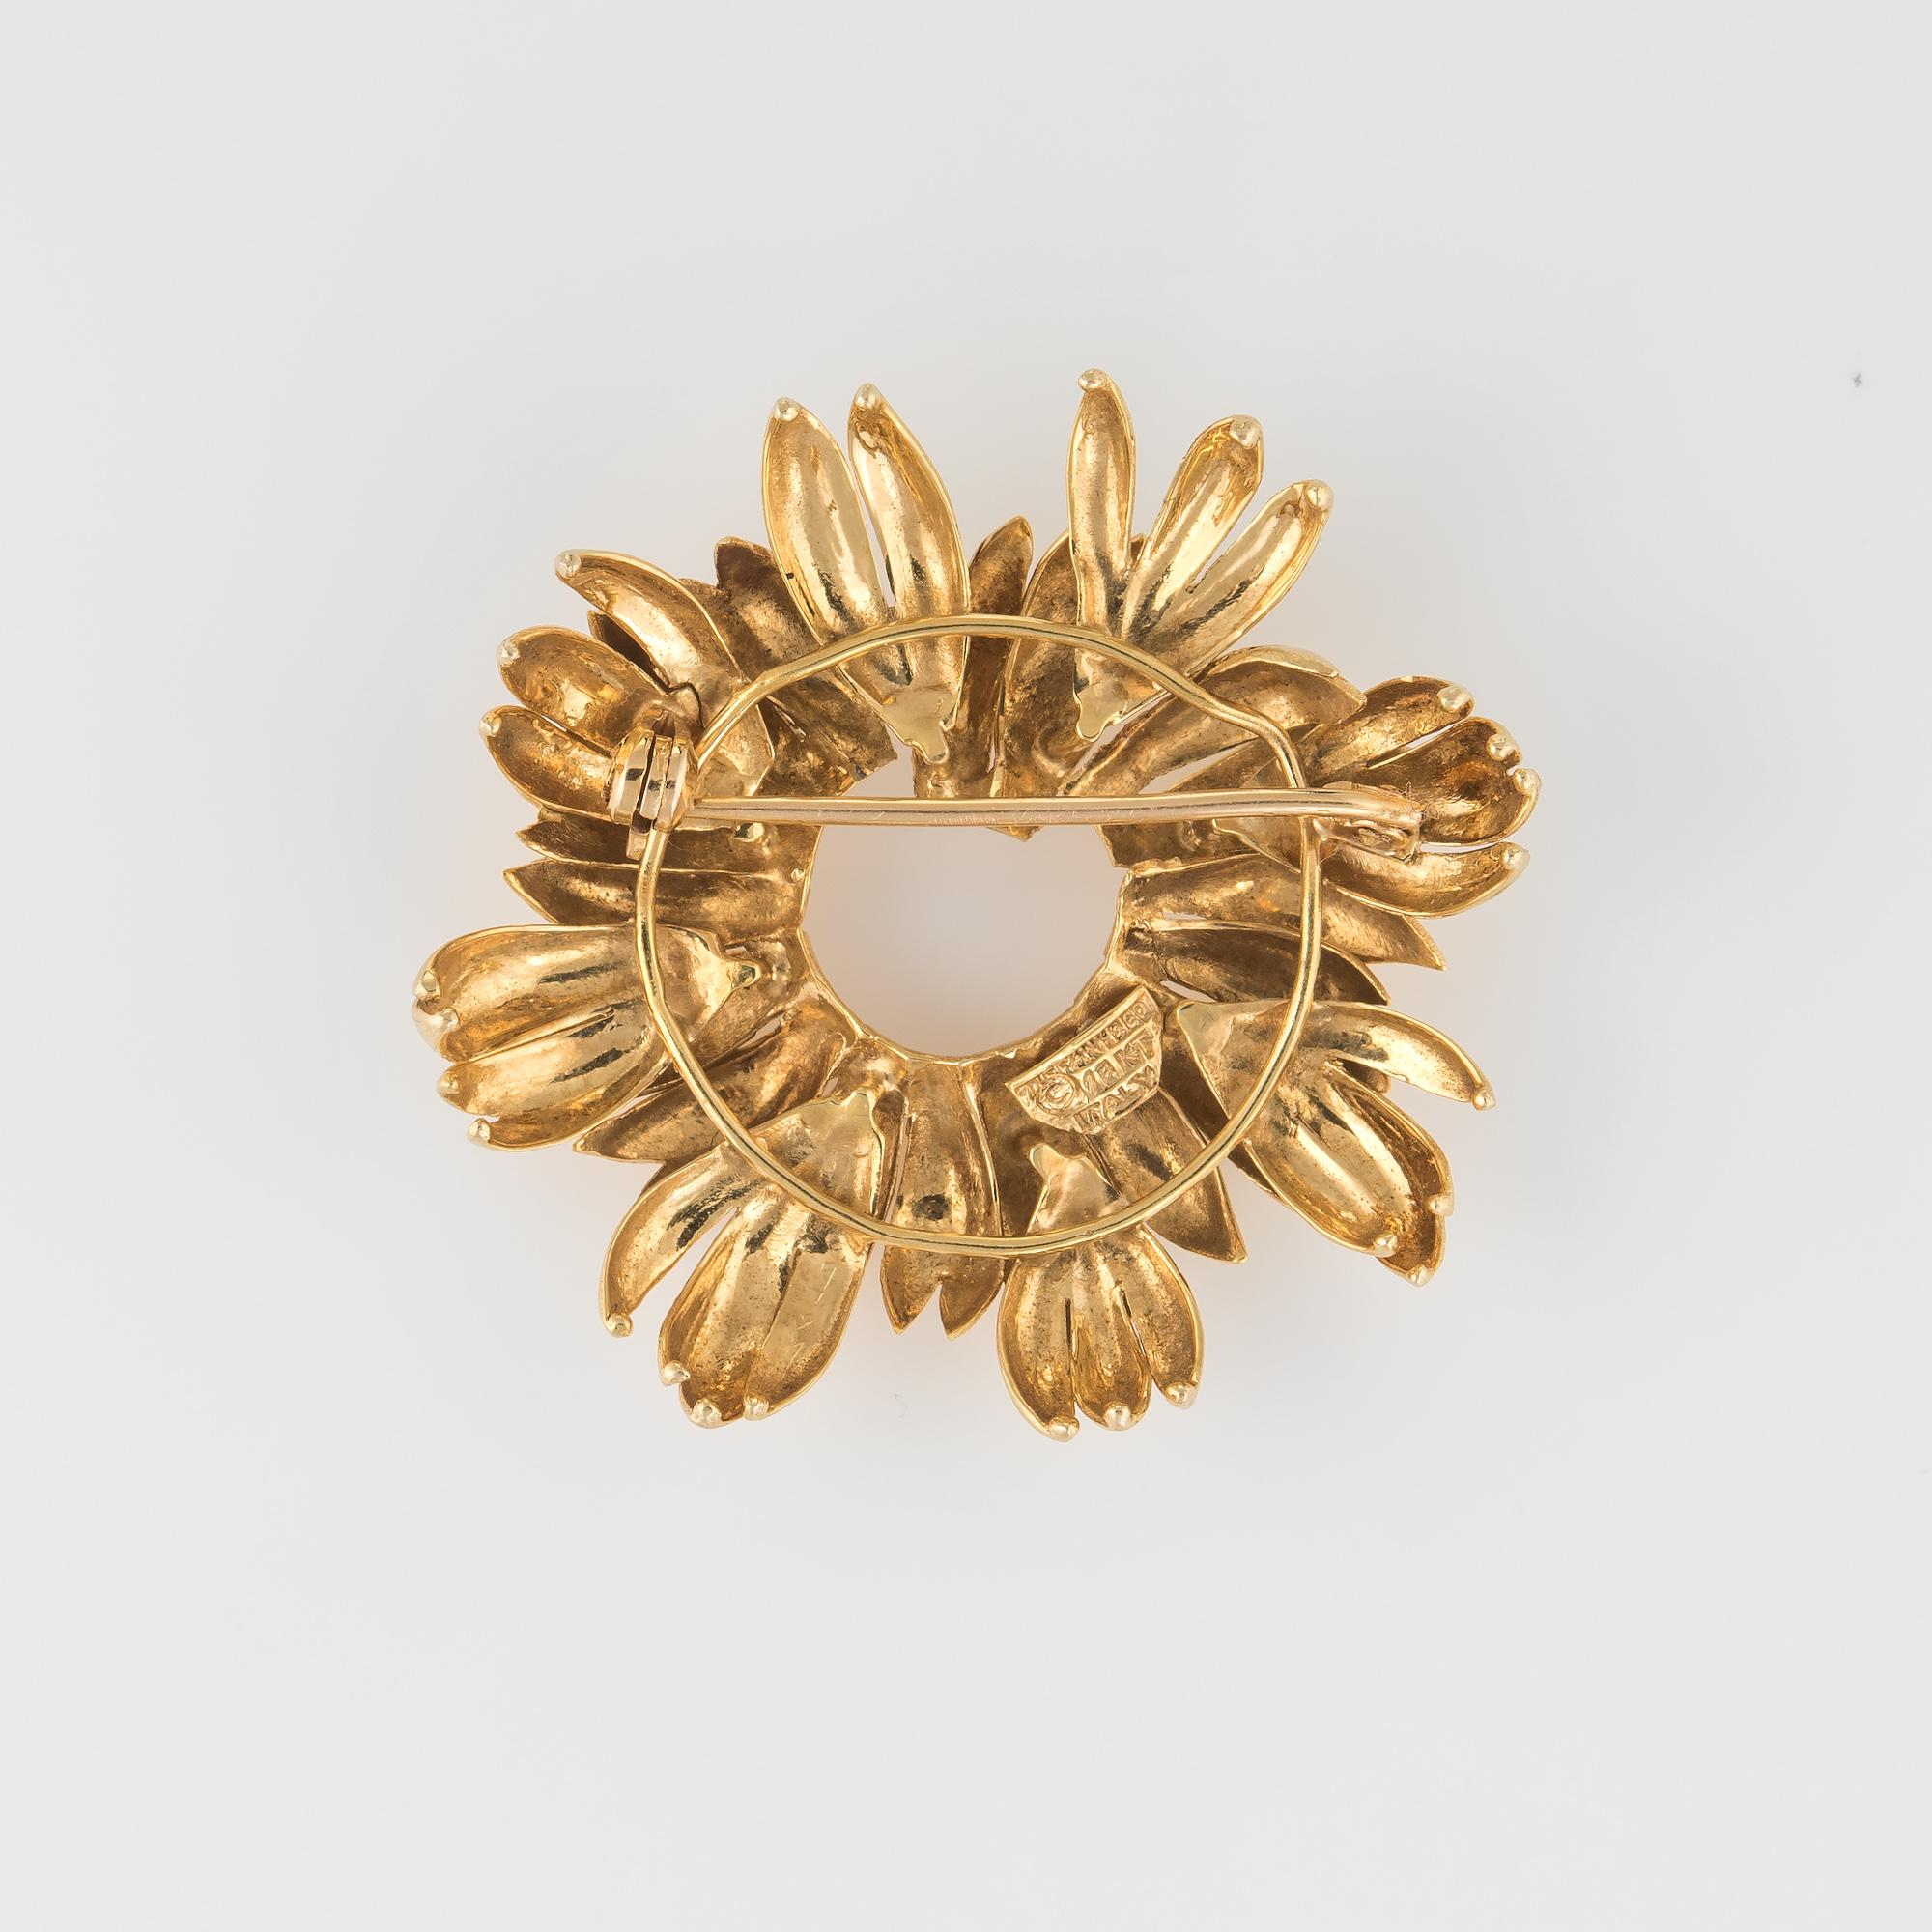 Finely detailed vintage Tiffany & Co (circa 1980s) wreath brooch crafted in 18 karat yellow gold. 

The wreath features applied layers giving a lifelike appearance to the brooch. 

The brooch is in very good condition. 

Particulars:

Weight: 13.3